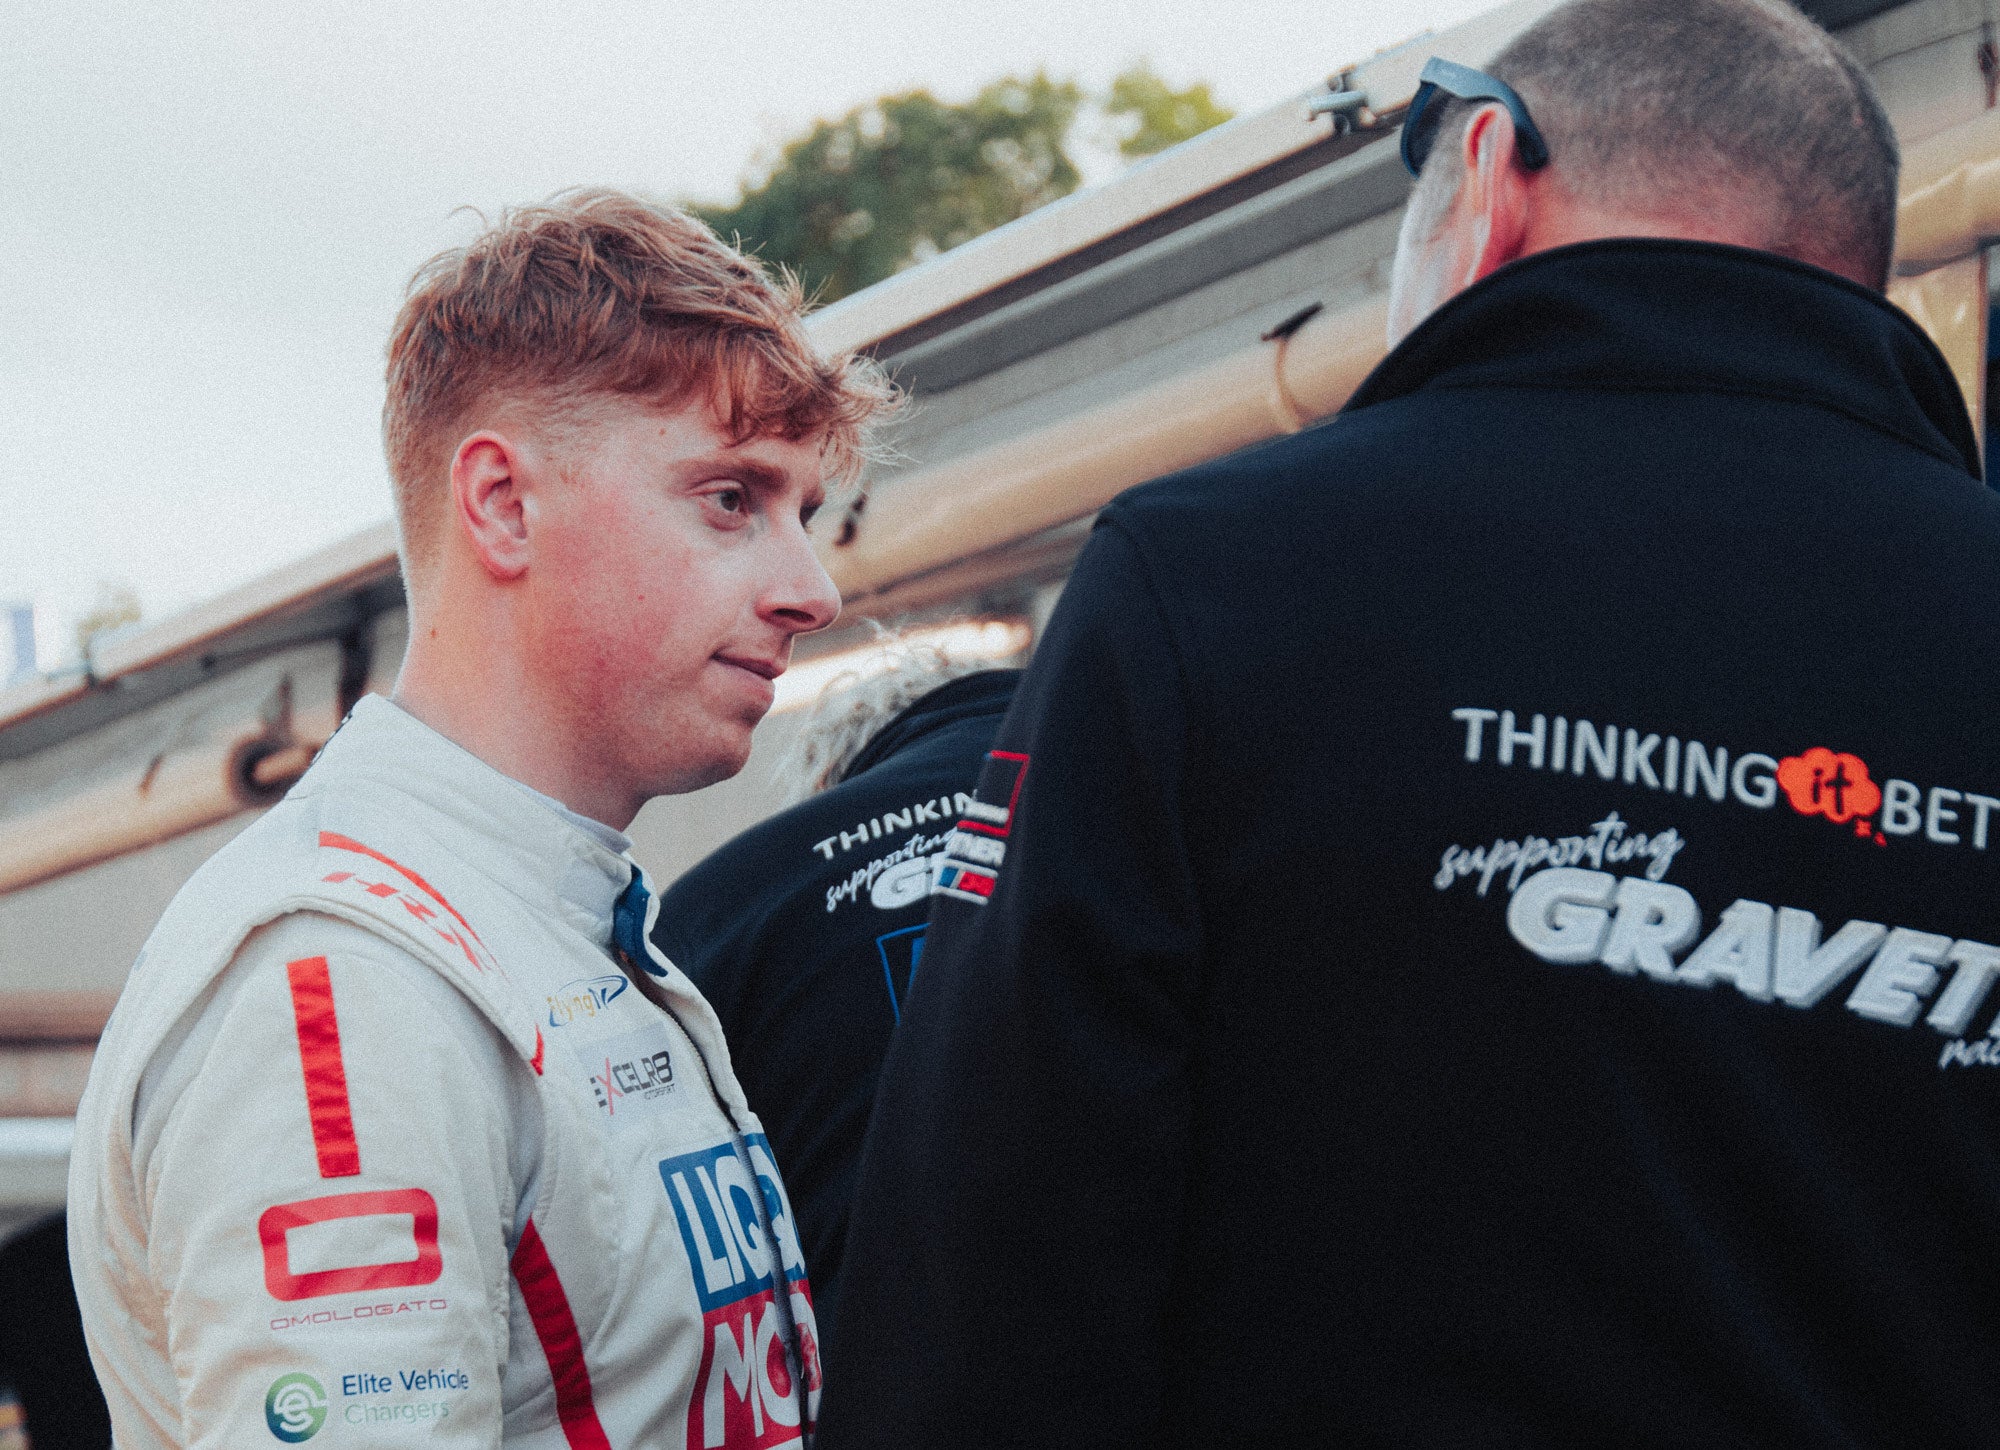 Bradley Gravett son of BTCC British Touring Car Champion Robb Gravett in the MINI Challenge JCW Series 2022 Driving at Brands Hatch GP Brad talking to Ian Travers from Thinking it Better EXCELR8 Motorsport LIQUI MOLY LM Performance Scalextric